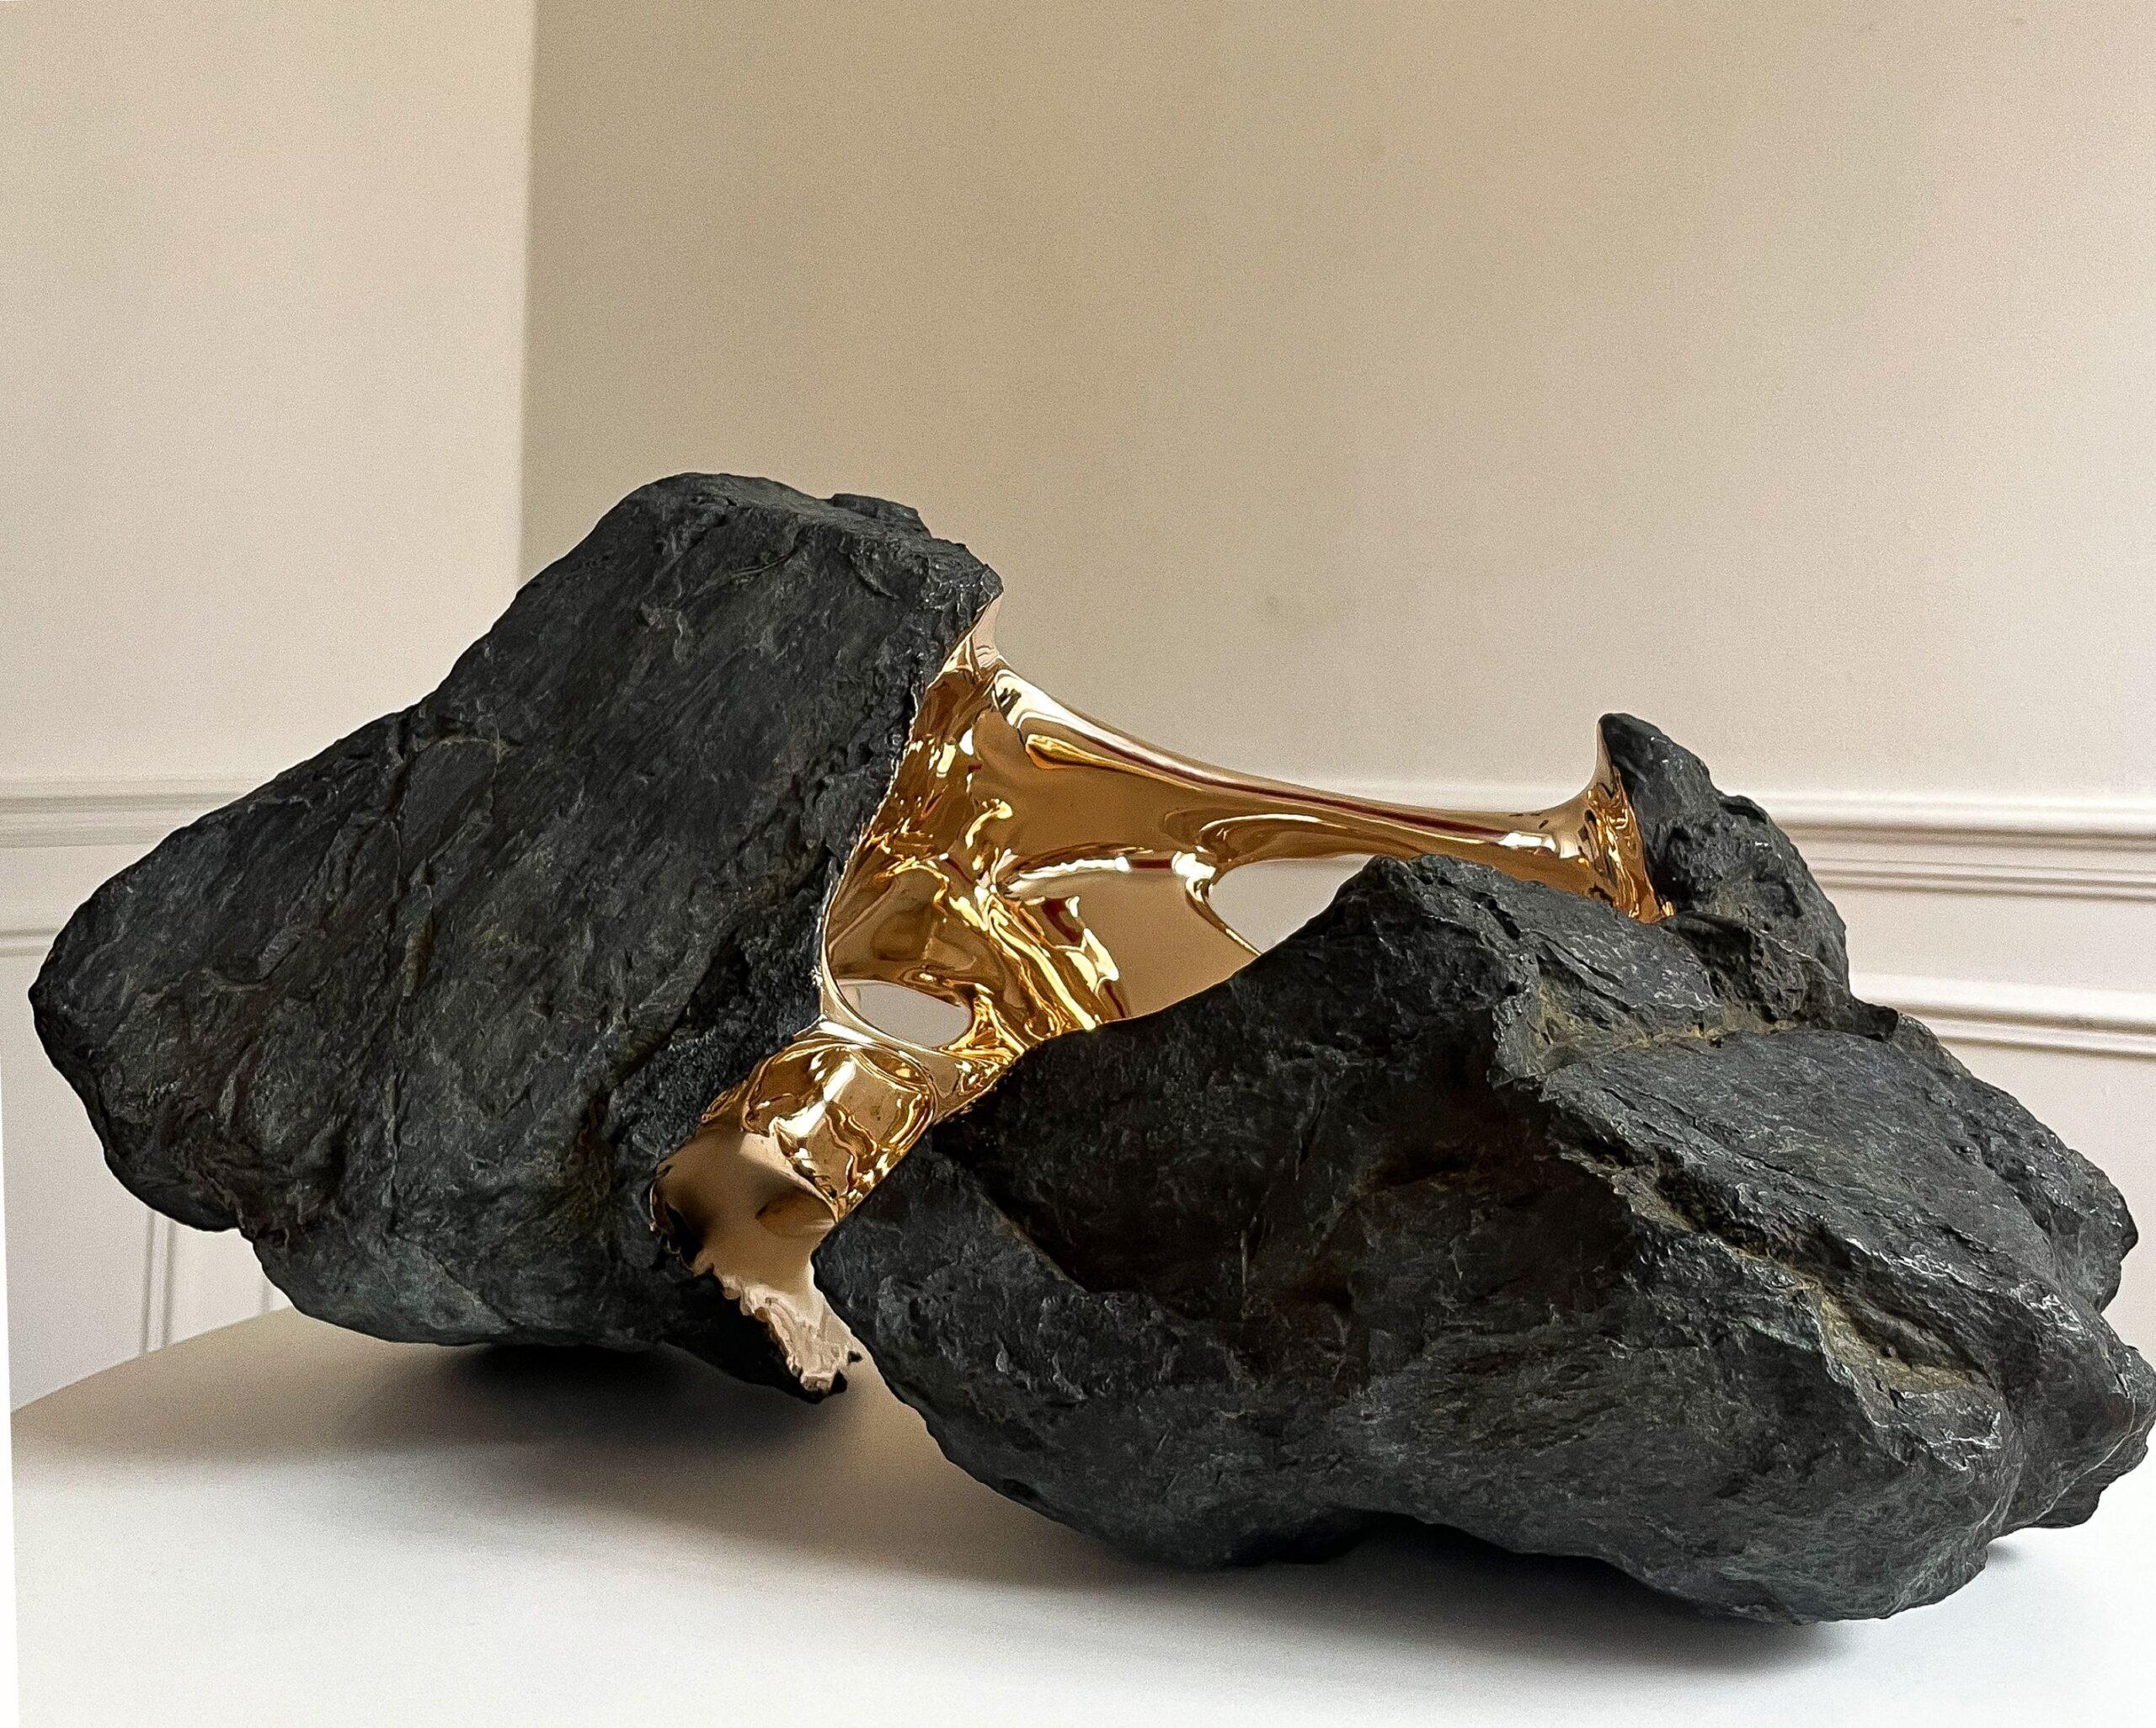 Kairos by Romain Langlois - Rock-like bronze sculpture, golden, abstract For Sale 5